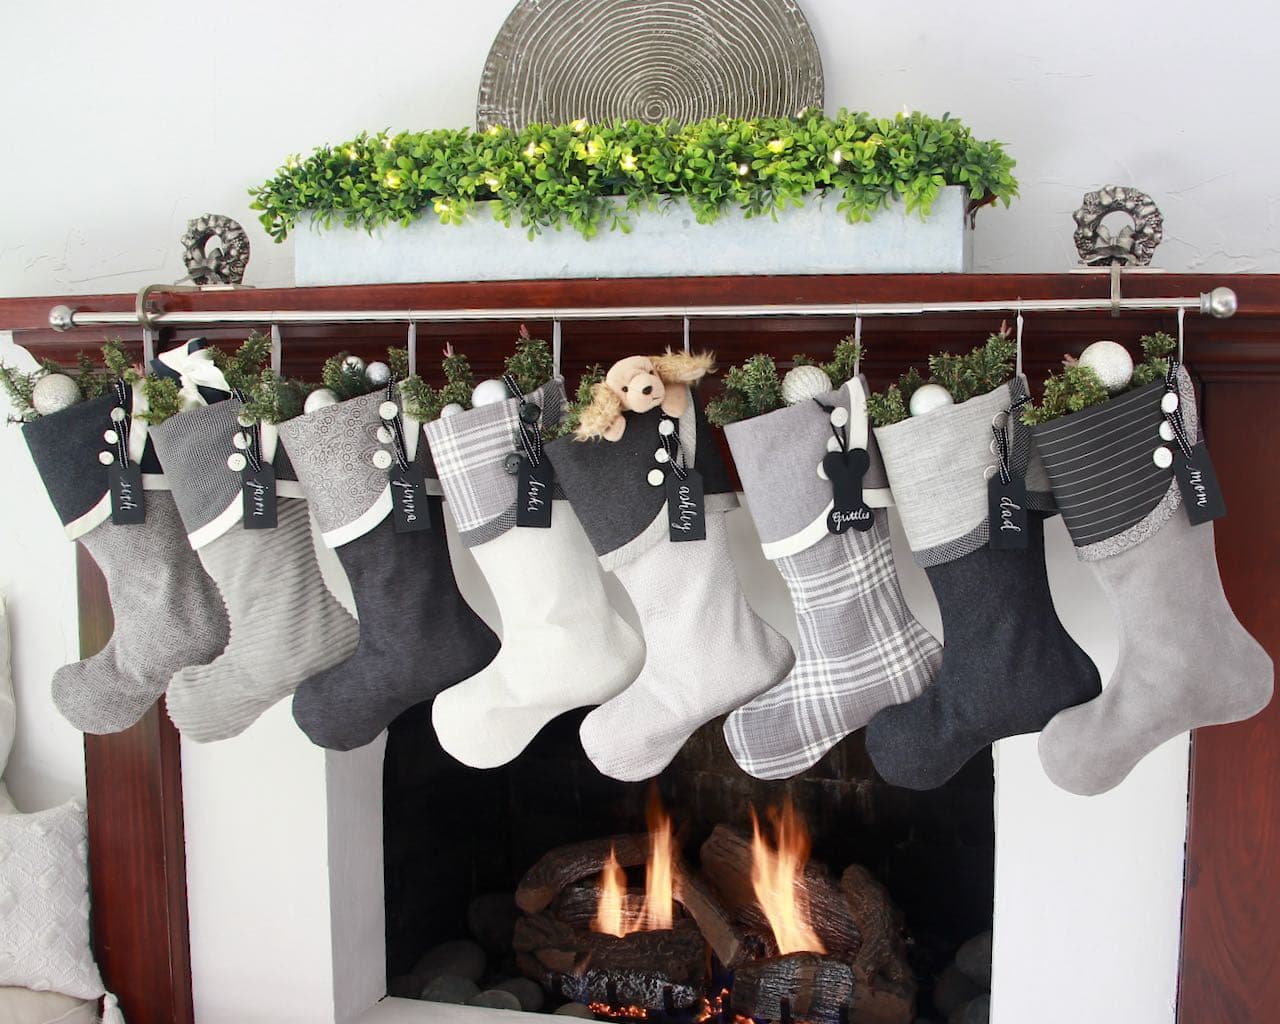 Eight coordinating Grey and winter white Christmas stockings  with black wood name tags hanging from a stocking rod on a wood mantel with a low horizontal planter filled with boxwood and a textured round art piece behind